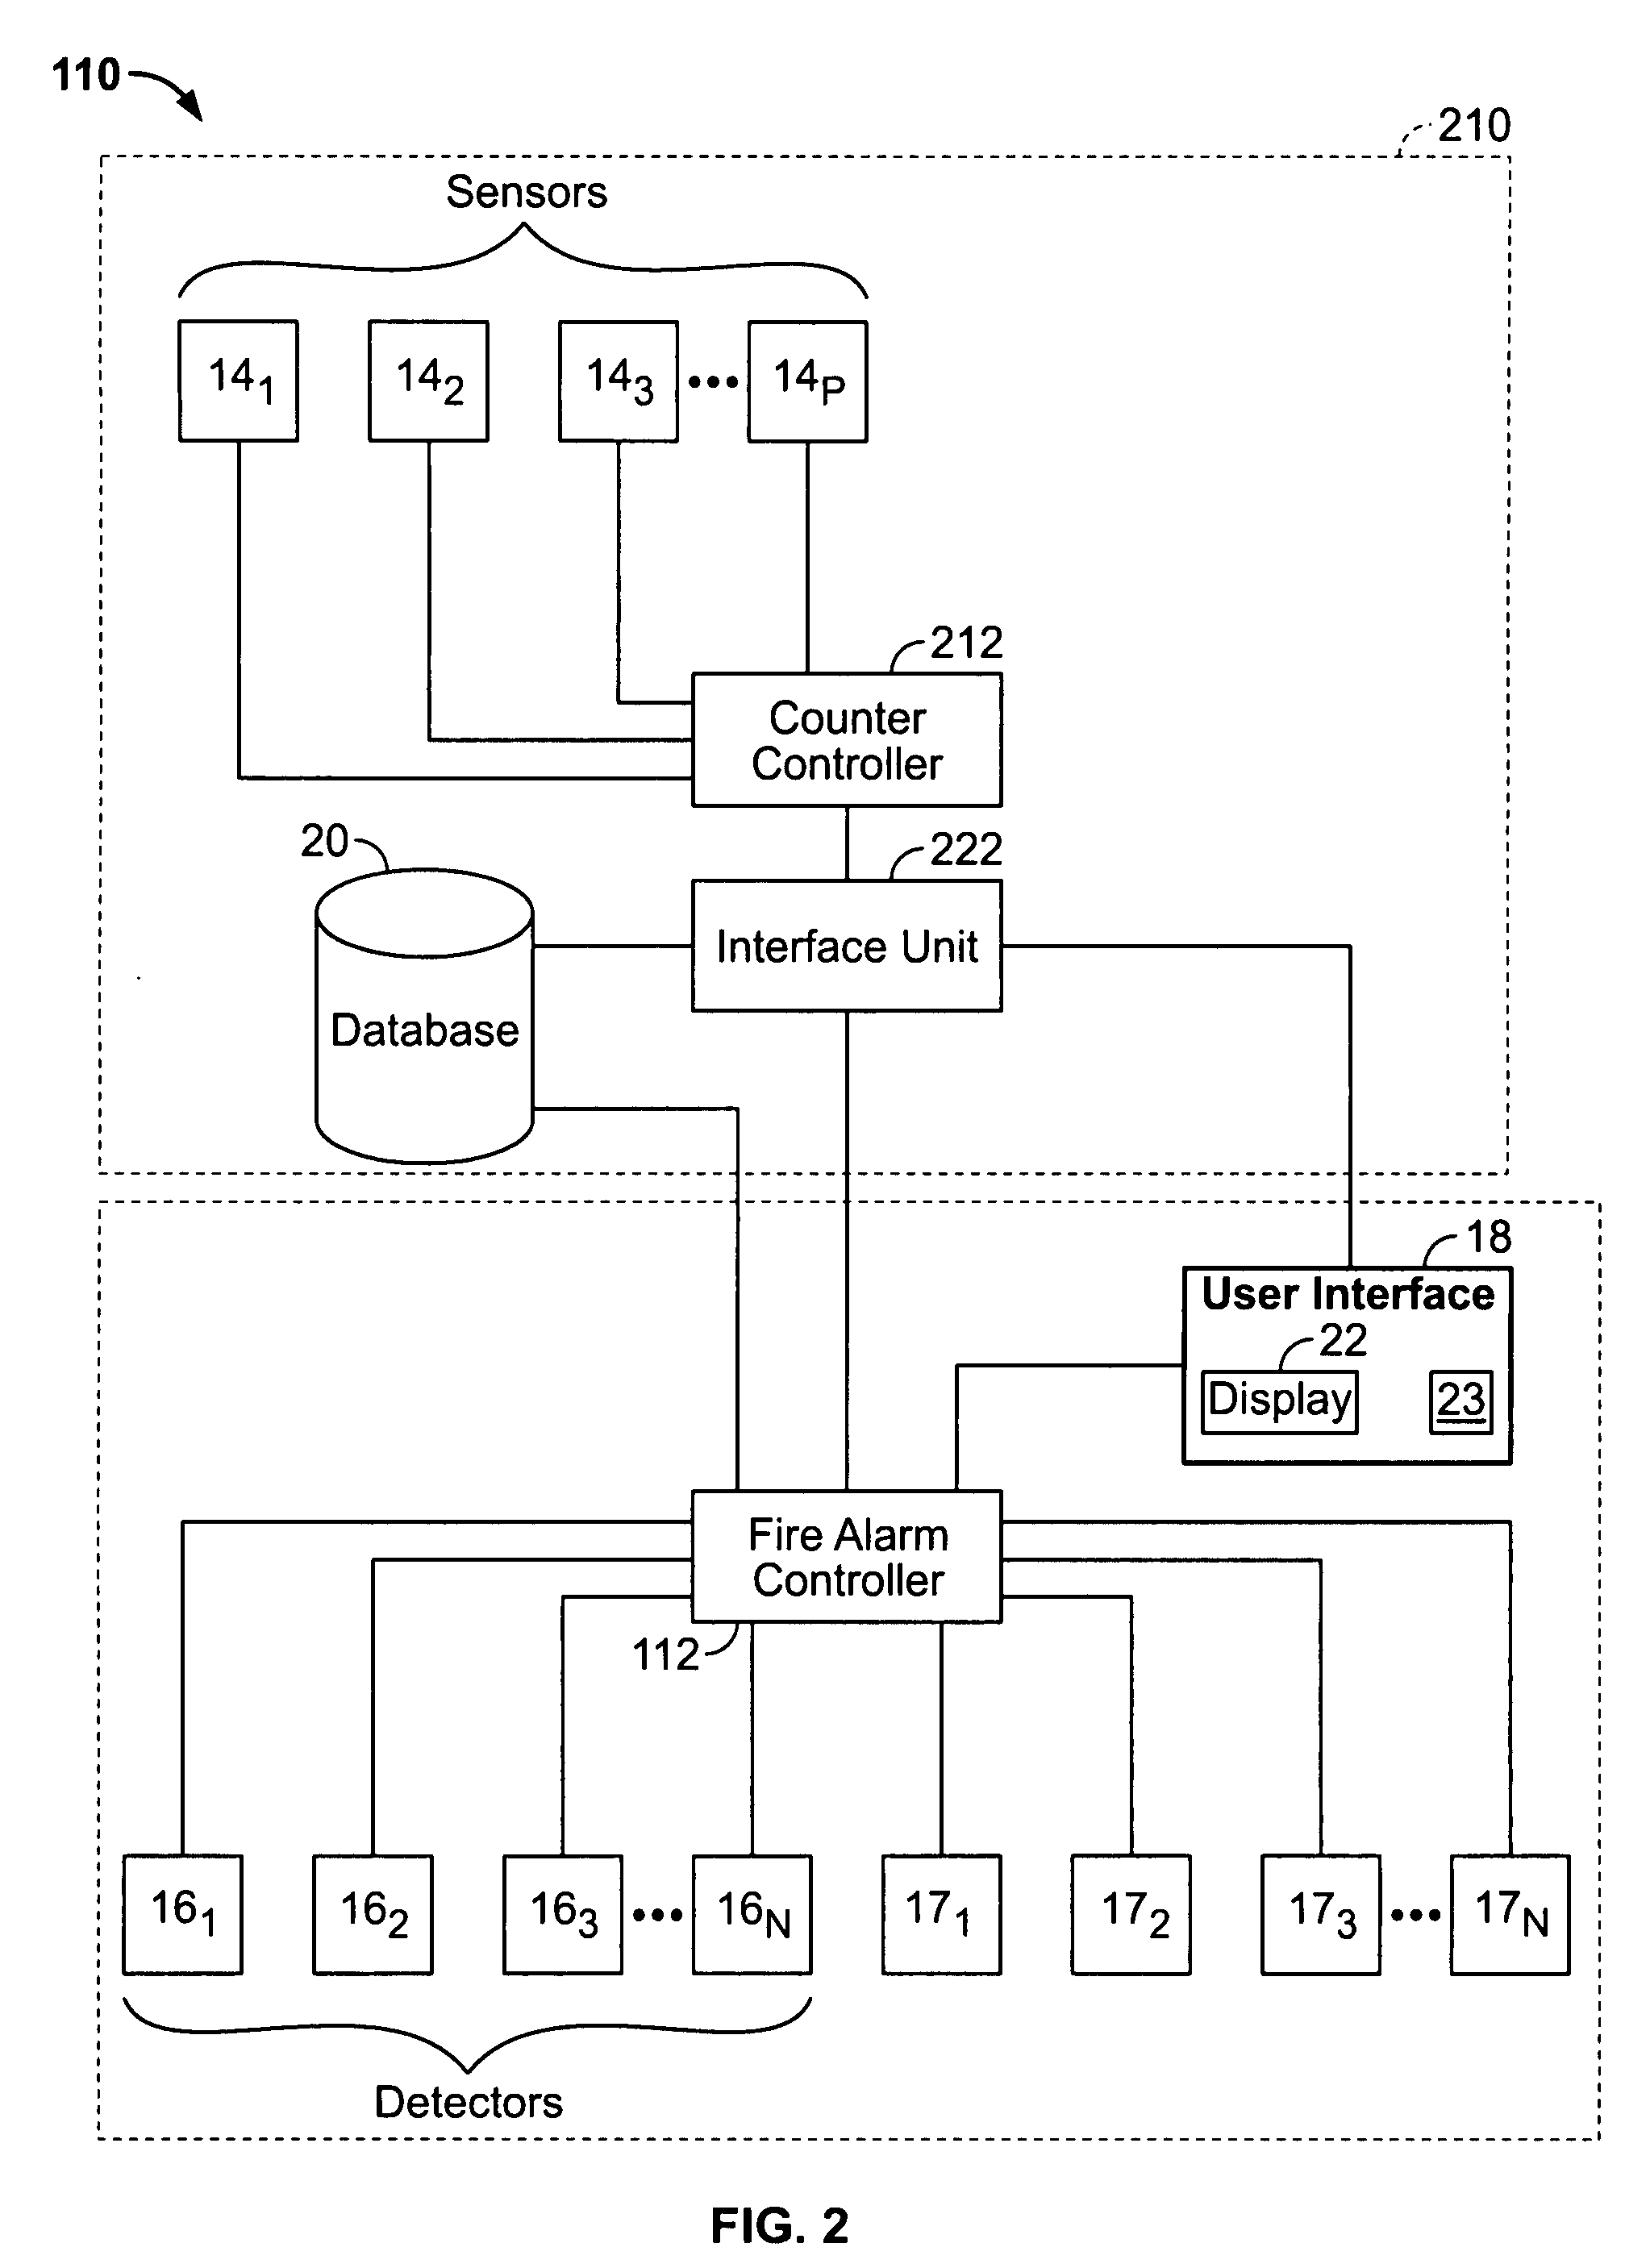 Method and apparatus for providing occupancy information in a fire alarm system